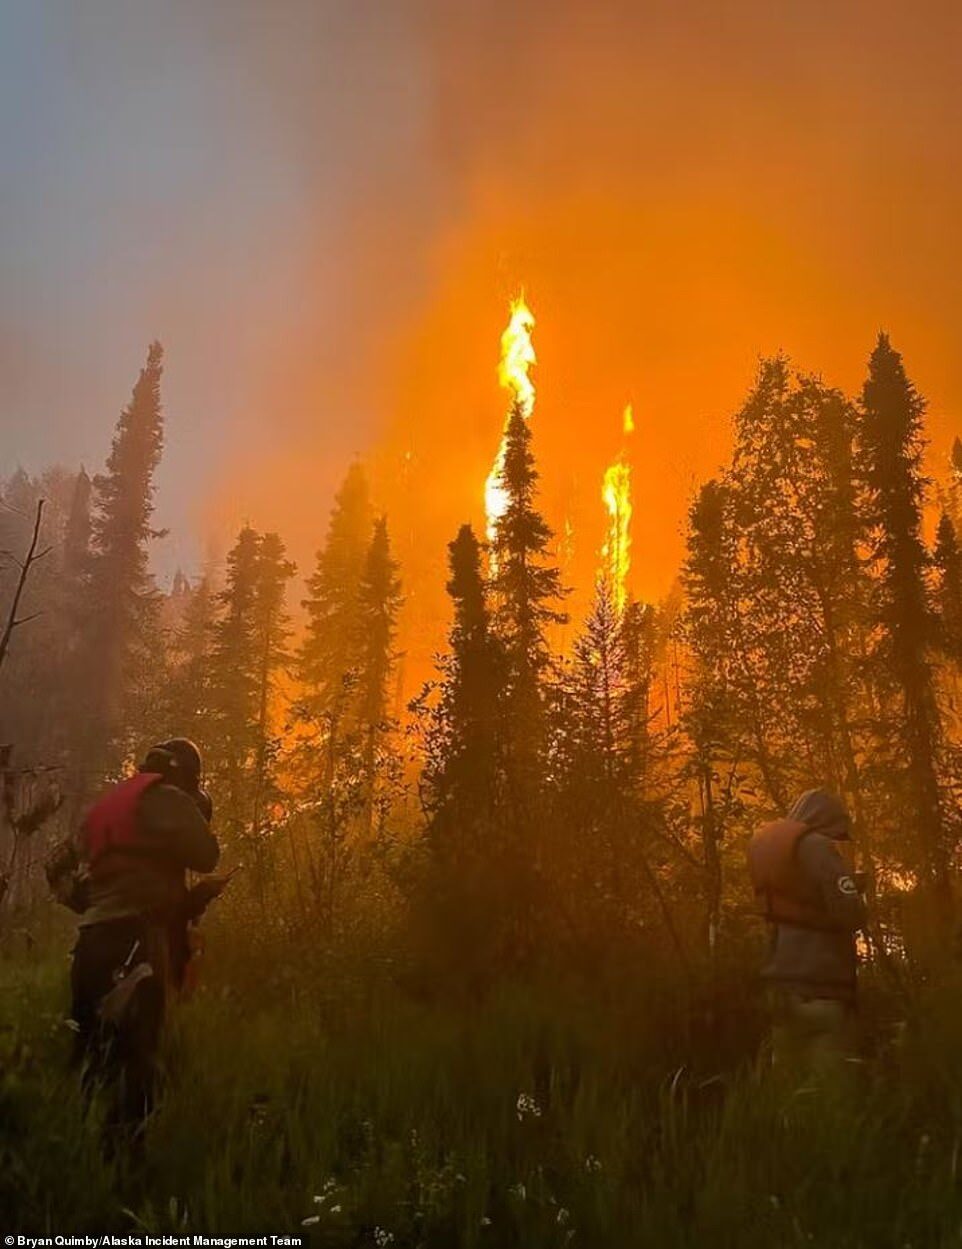 Drought, extreme temperatures and thousands of lightning bolts each day have created the perfect storm for wildfires Alaska's interior. Pictured is a wildfire that has burned 780,000 acres near Lime Village, Alaska